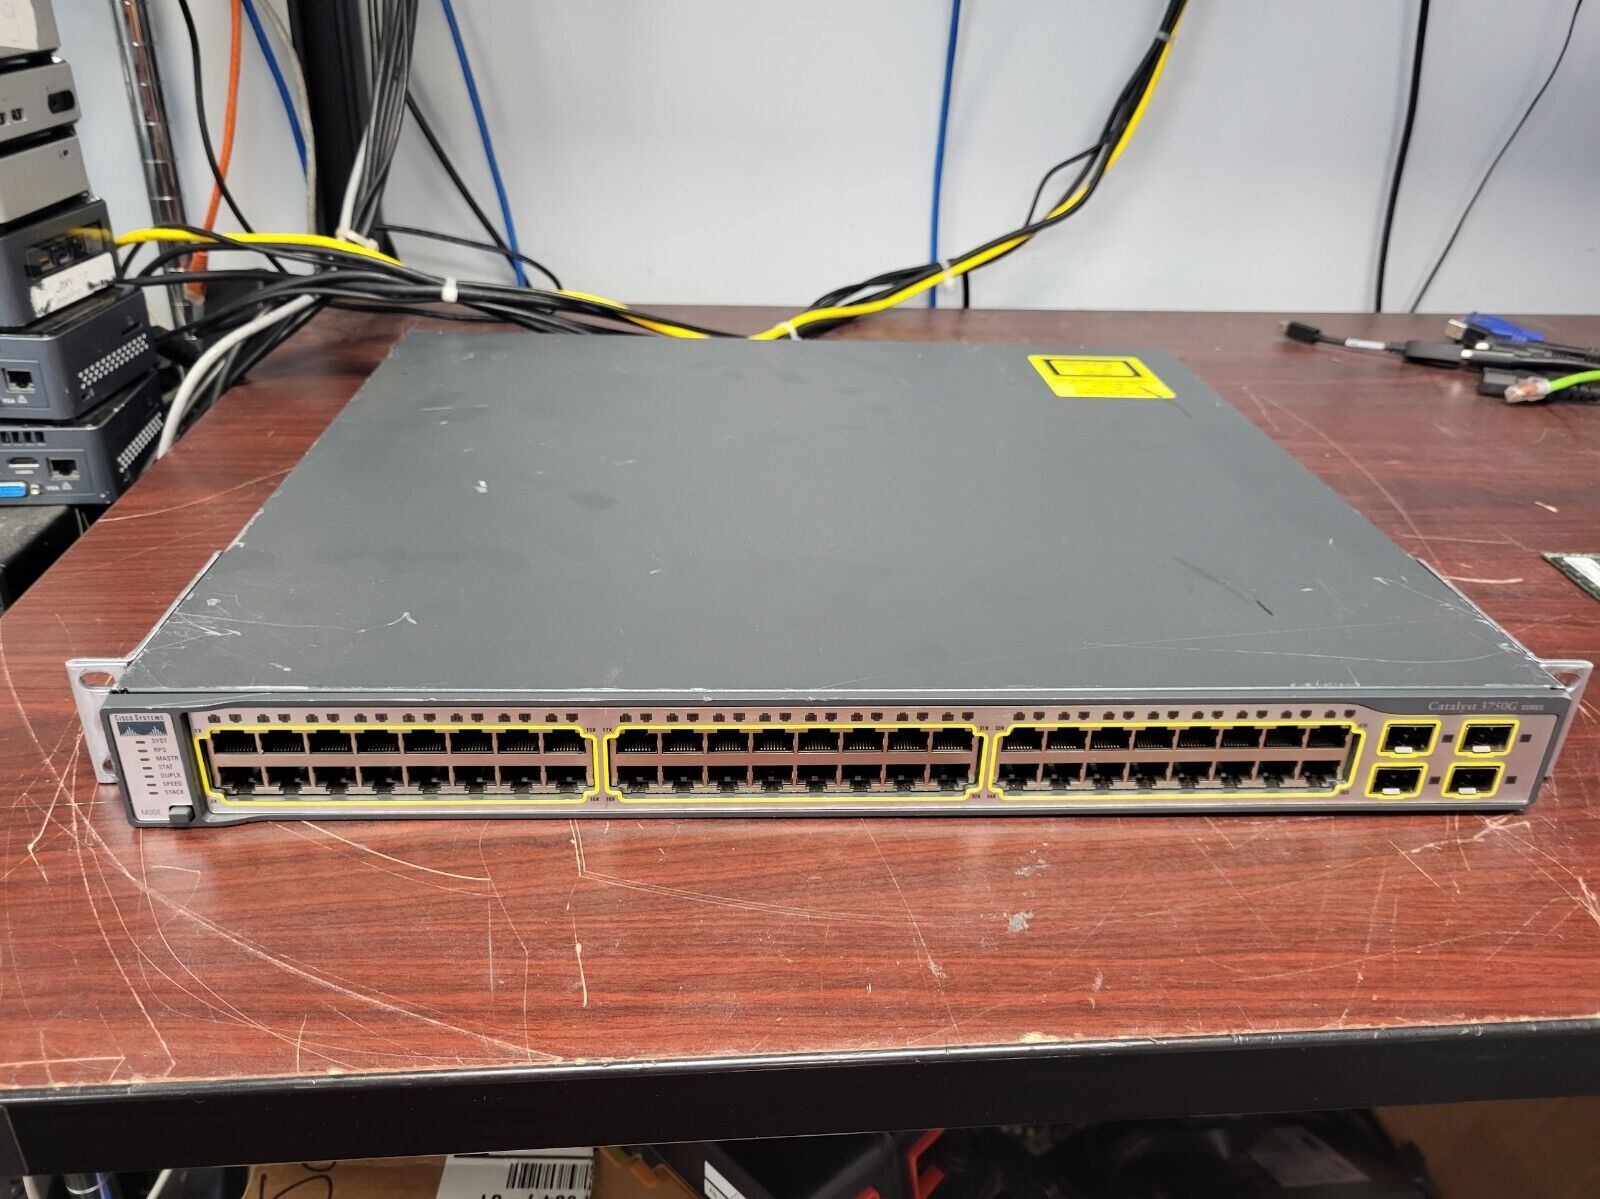 CISCO CATALYST WS-C3750G-48TS-E V04 Switch Tested Reset Working #73